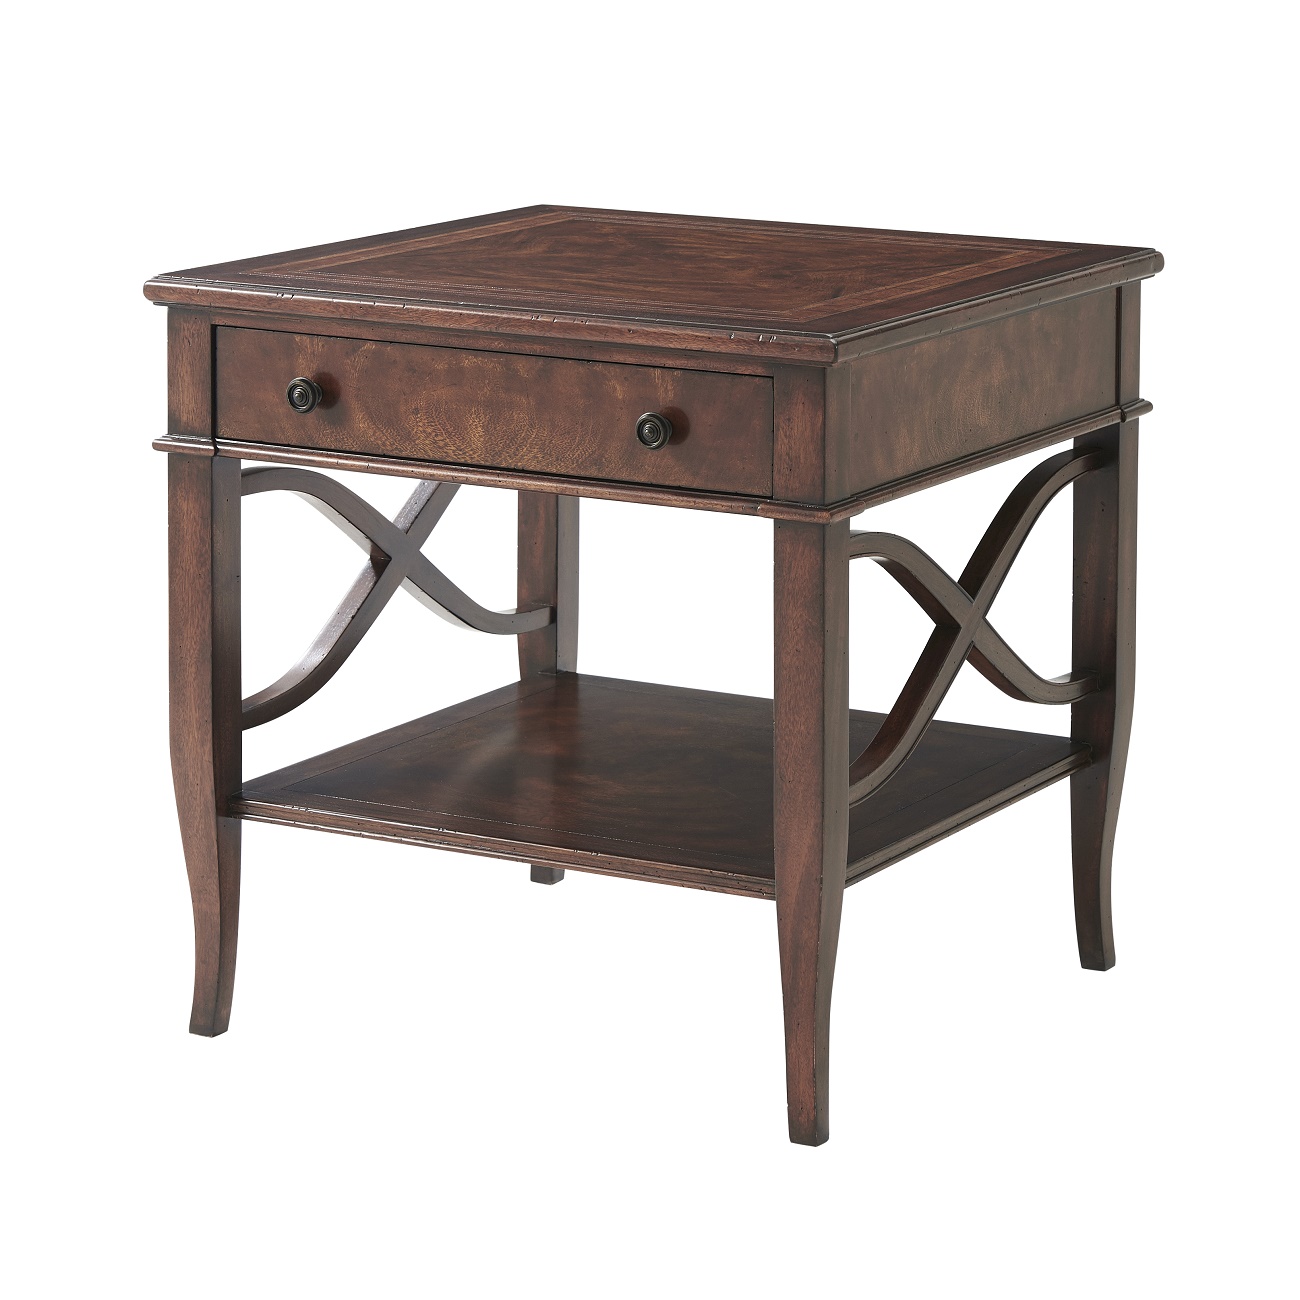 Saint-Simon Accent Table, Theodore Alexander Table, Brooklyn, New York, Furniture by ABD